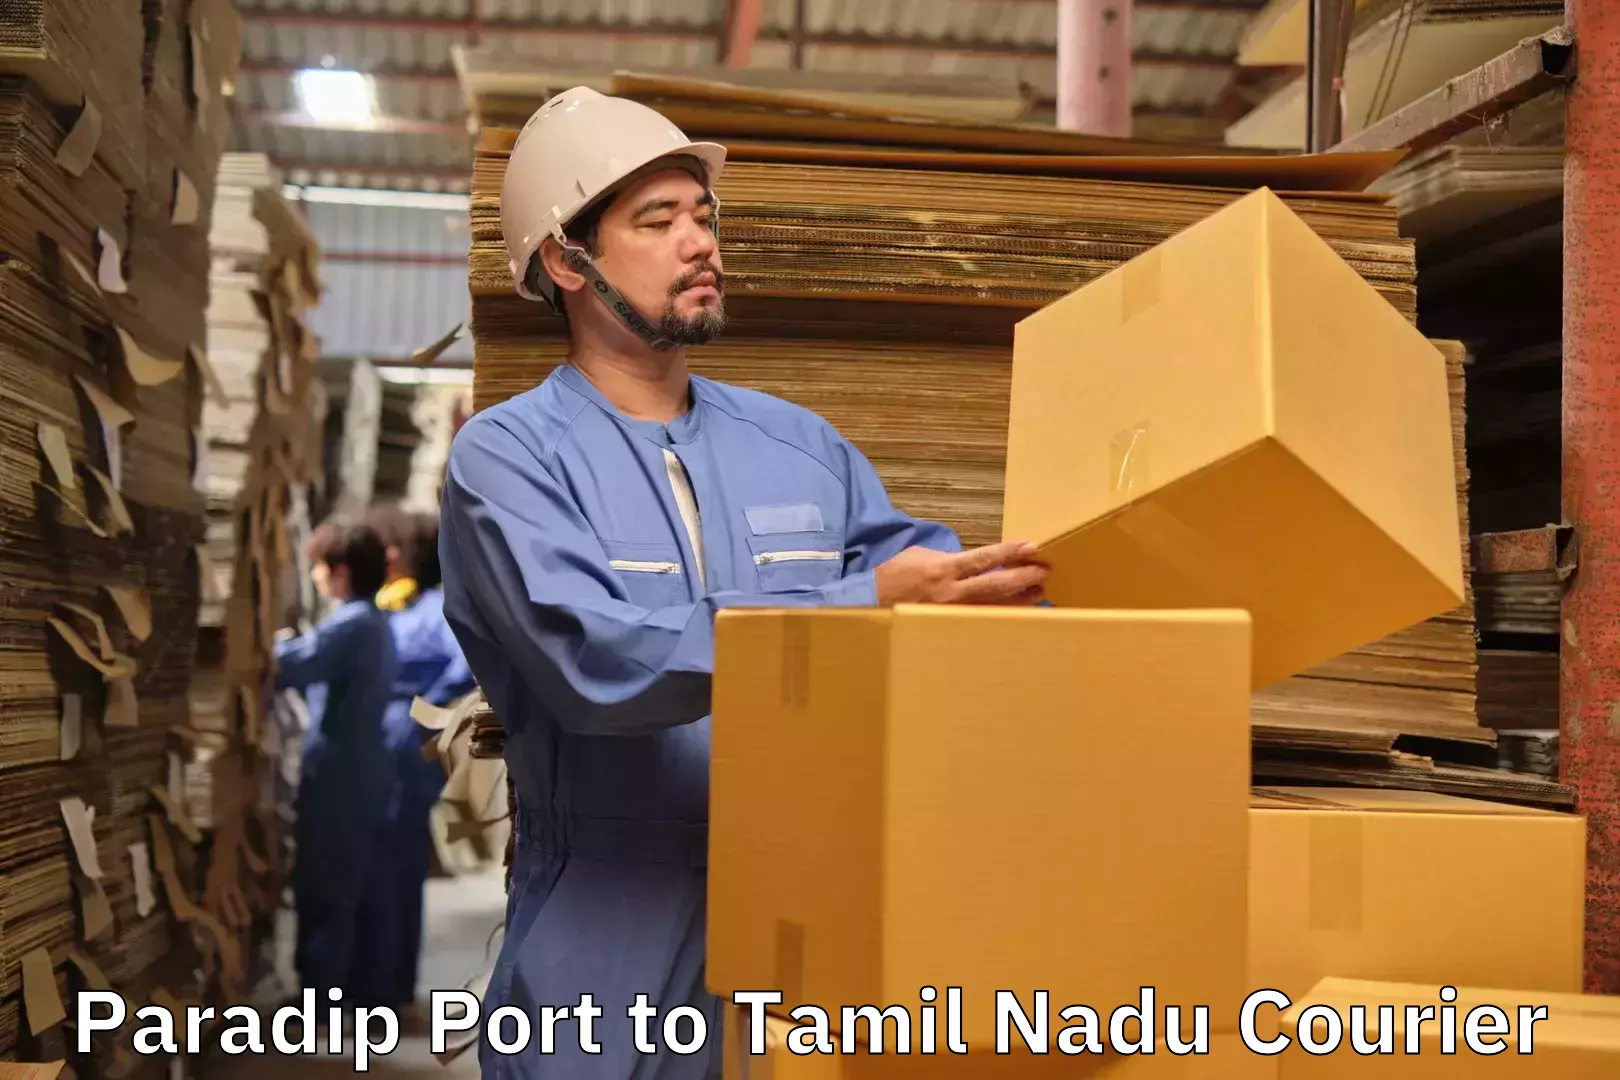 Online luggage shipping booking Paradip Port to The Gandhigram Rural Institute